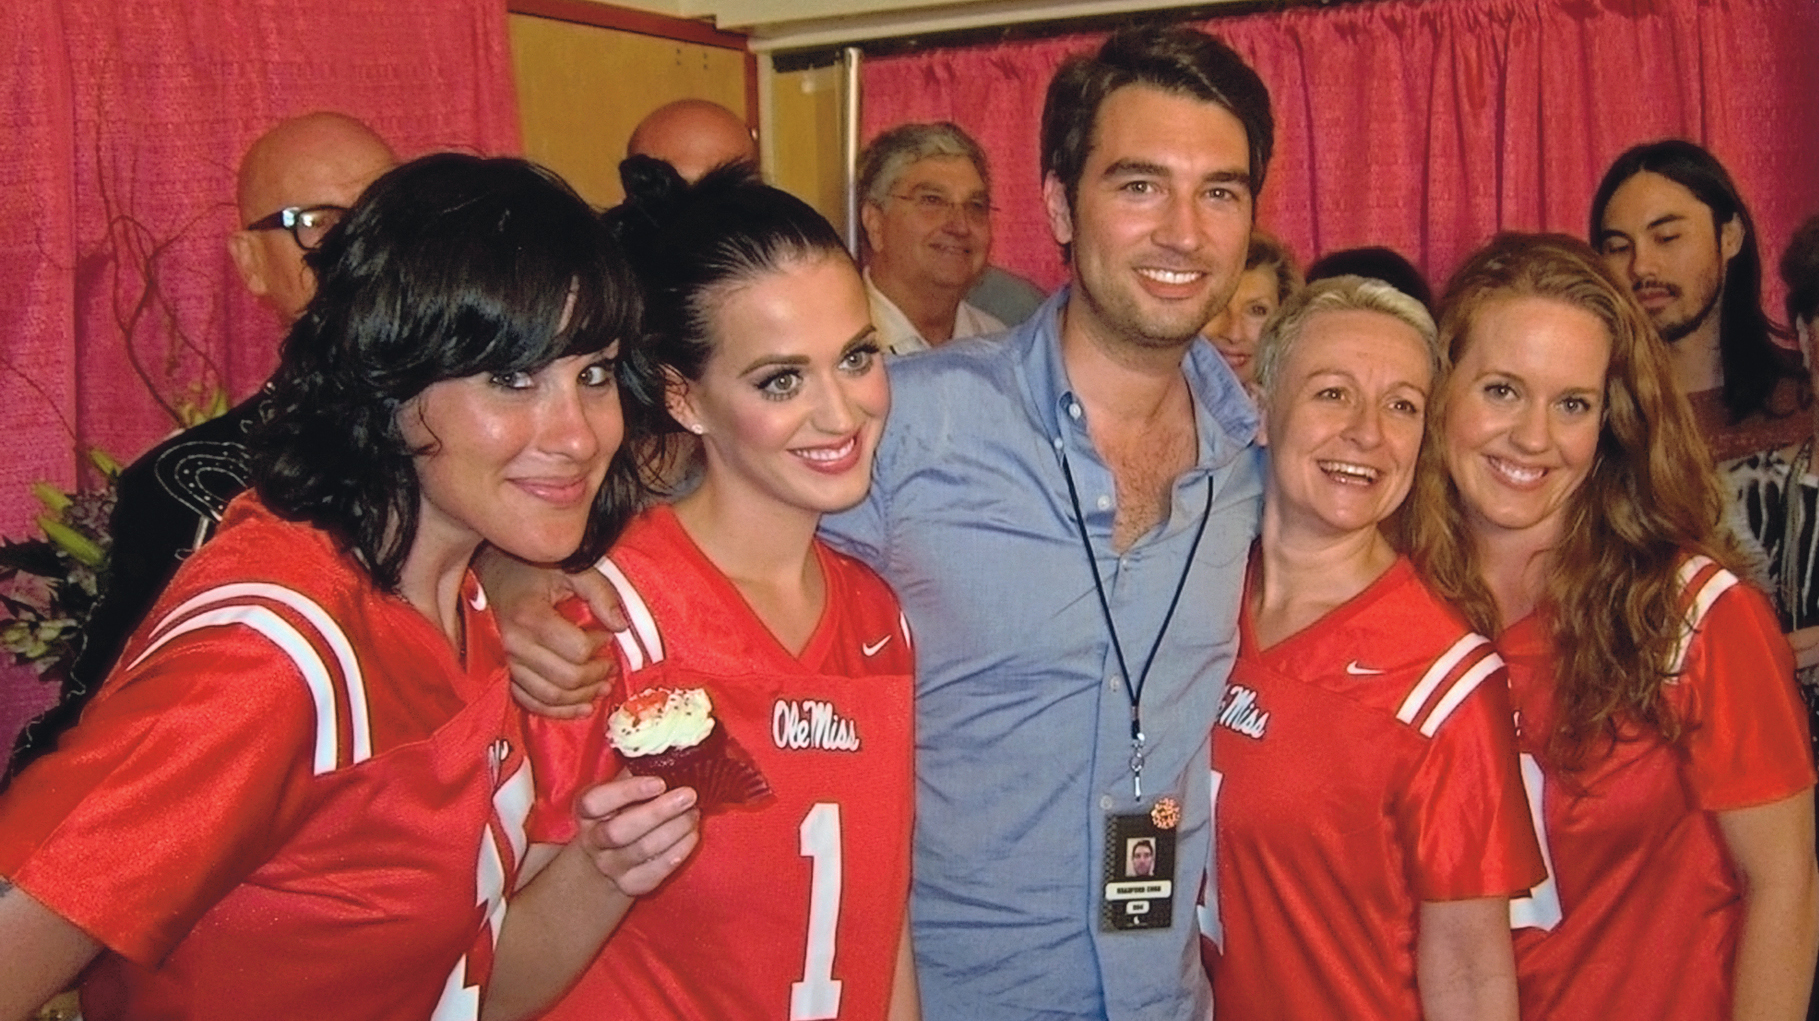 Bradford Cobb poses with Katy Perry and friends